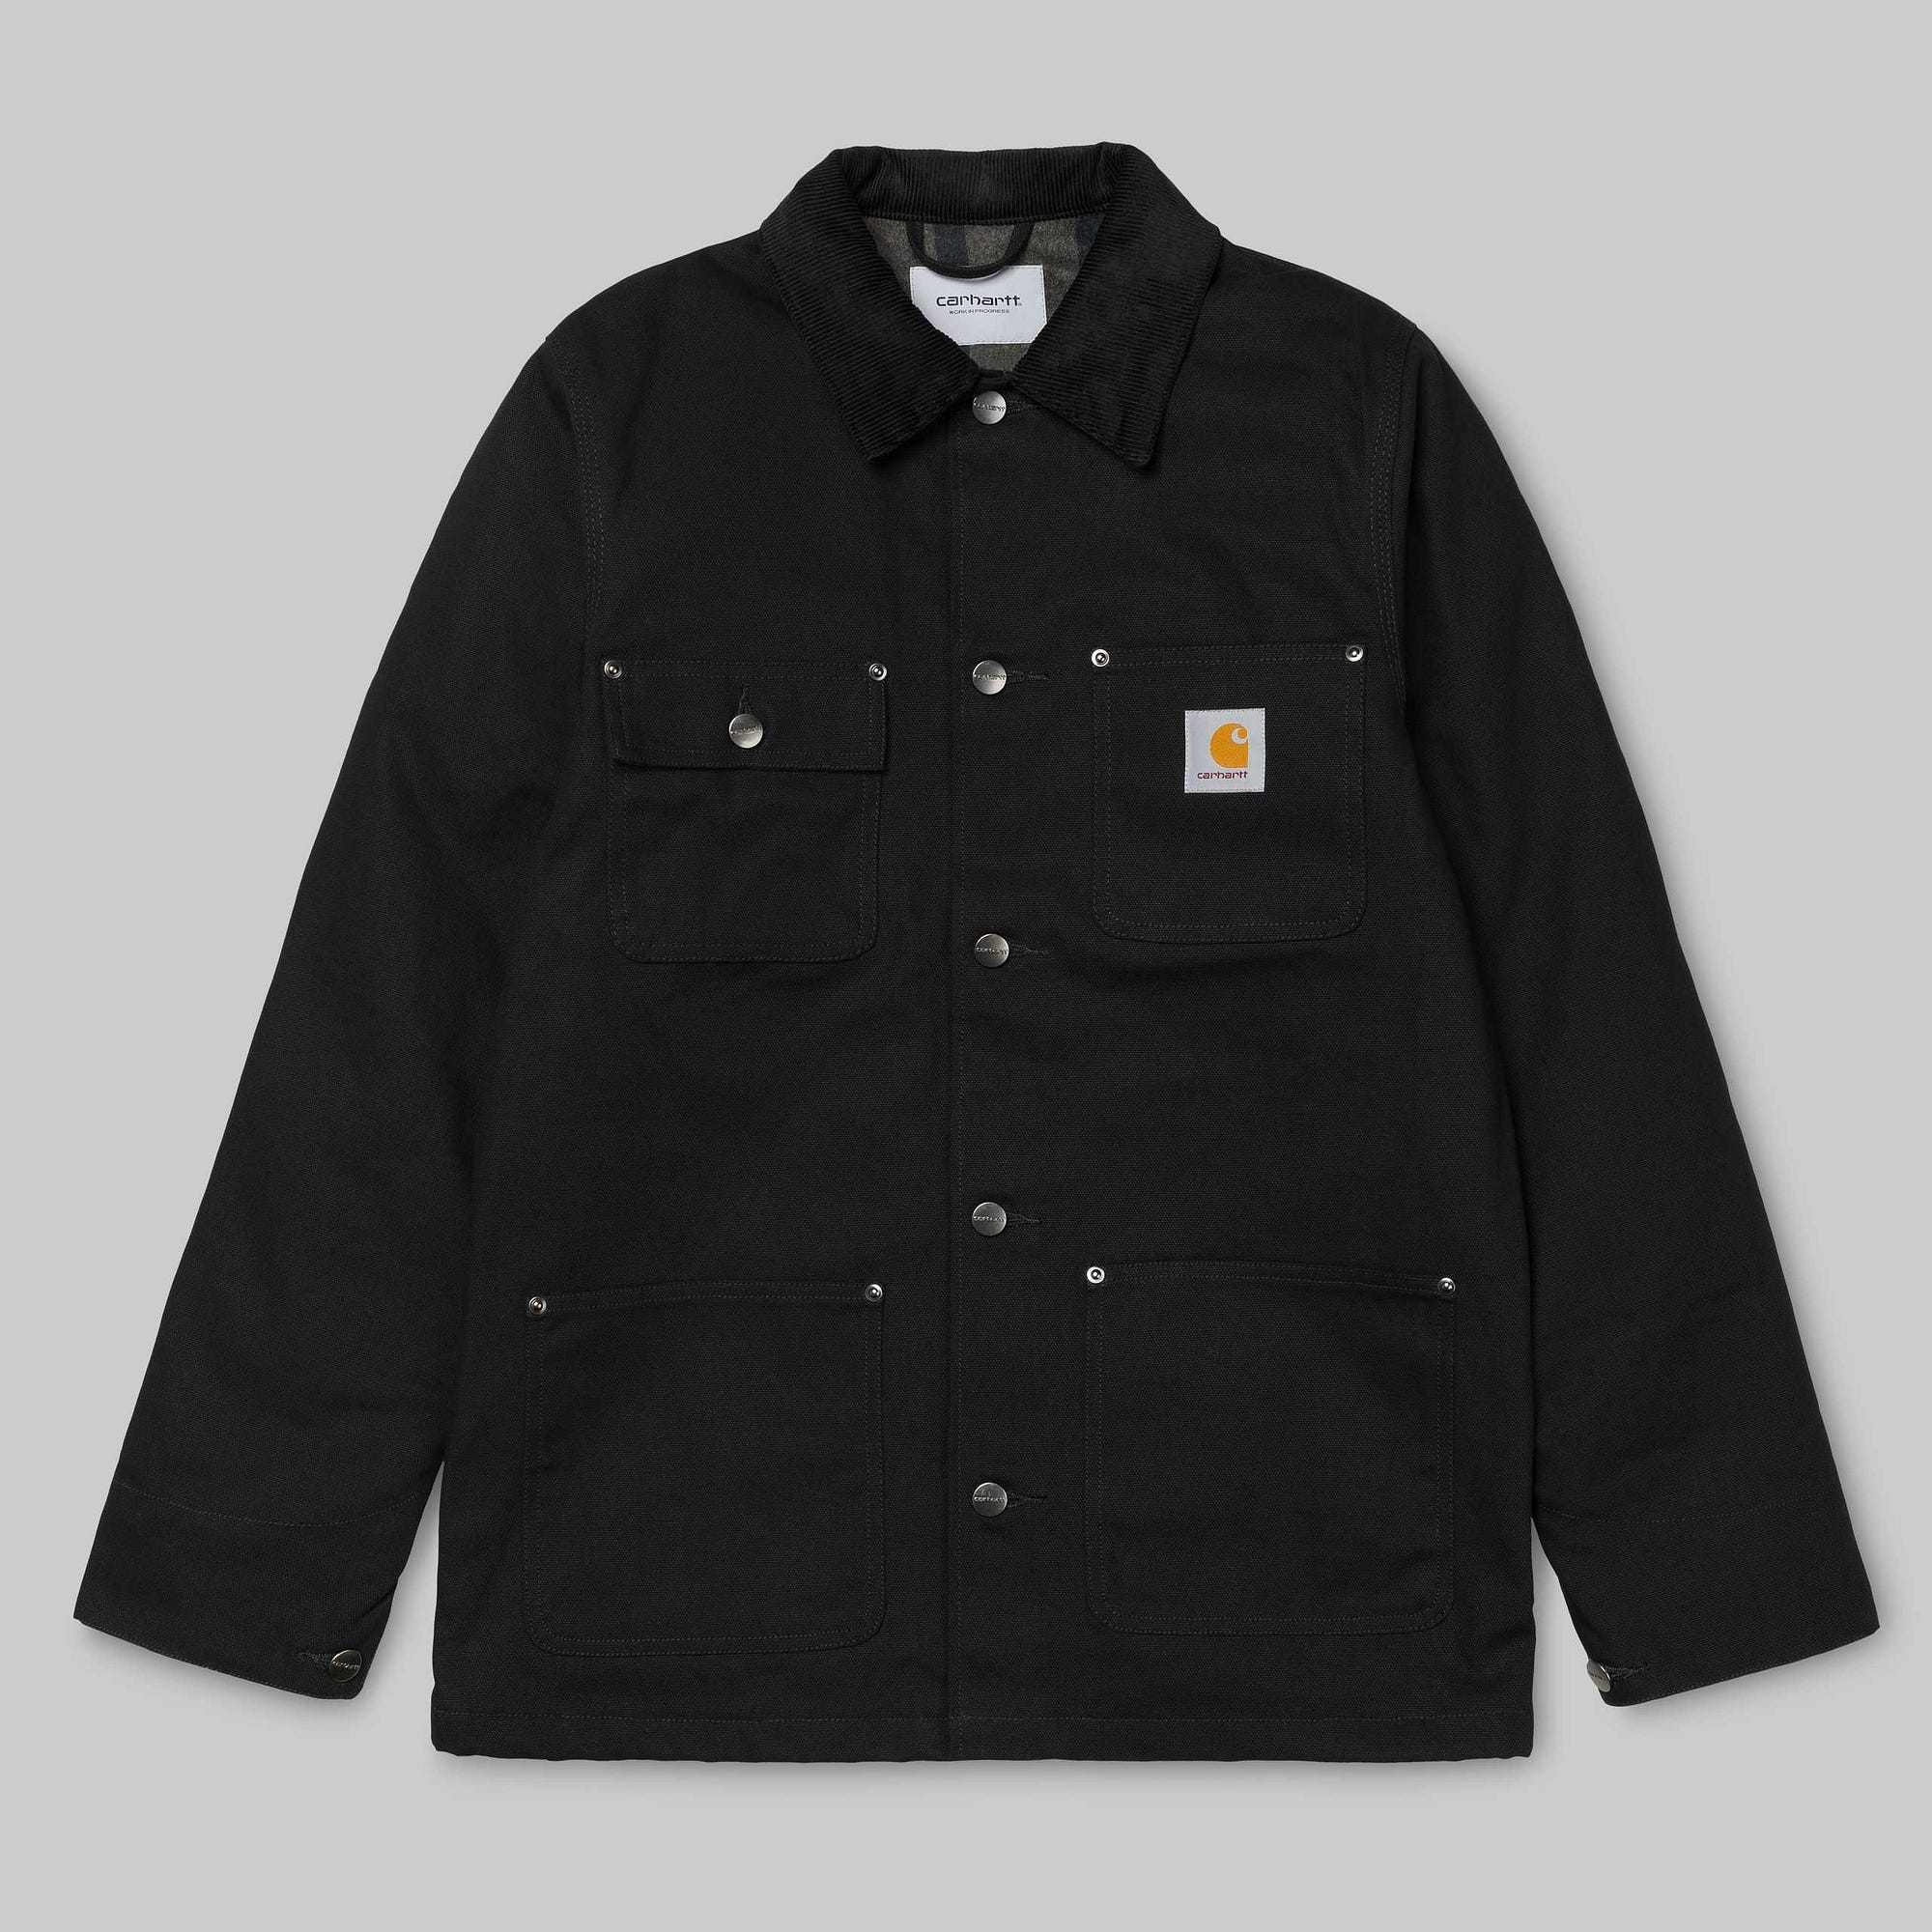 Iconic ownership. Carhartt. Aesthetic perfection.